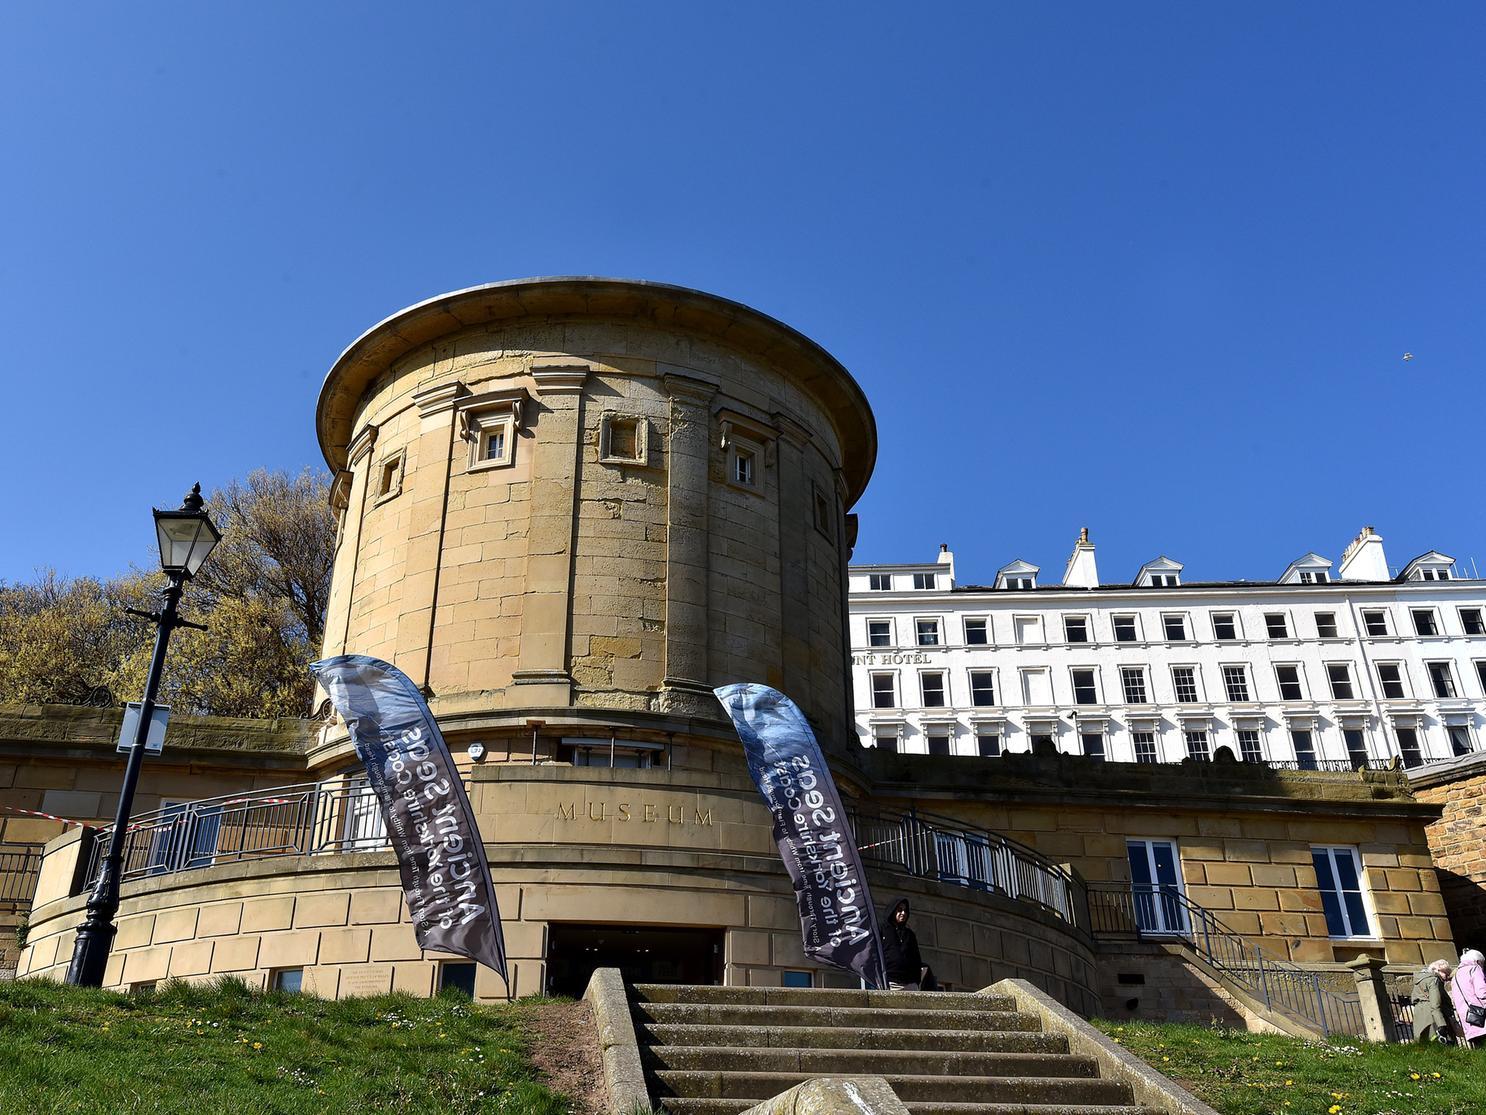 The Rotunda Museum was built in 1829 as one of the country's first purpose-built museums.